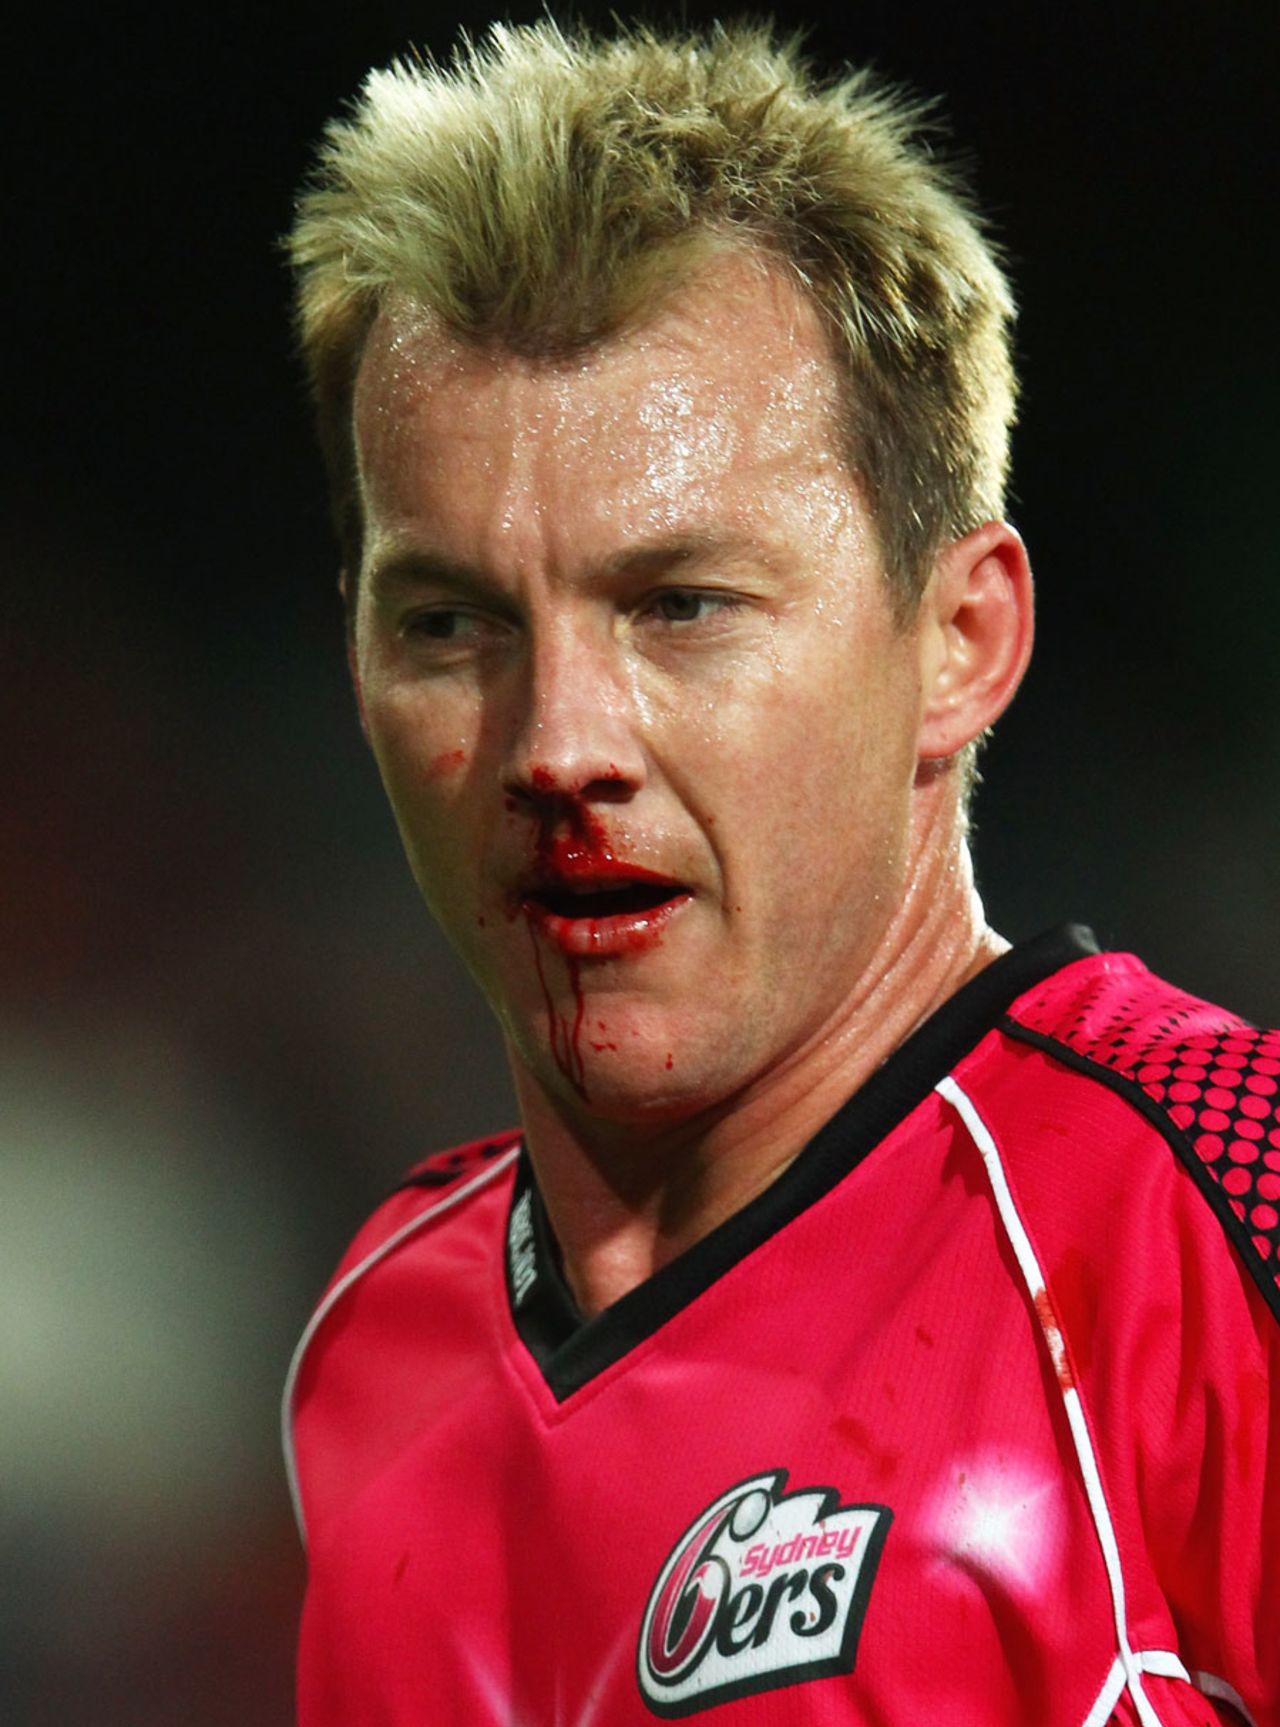 Brett Lee is left bleeding after a collision with Phil Jaques, Hobart Hurricanes v Sydney Sixers, 2nd semi-final, BBL 2011-12, Hobart, January 22, 2012 